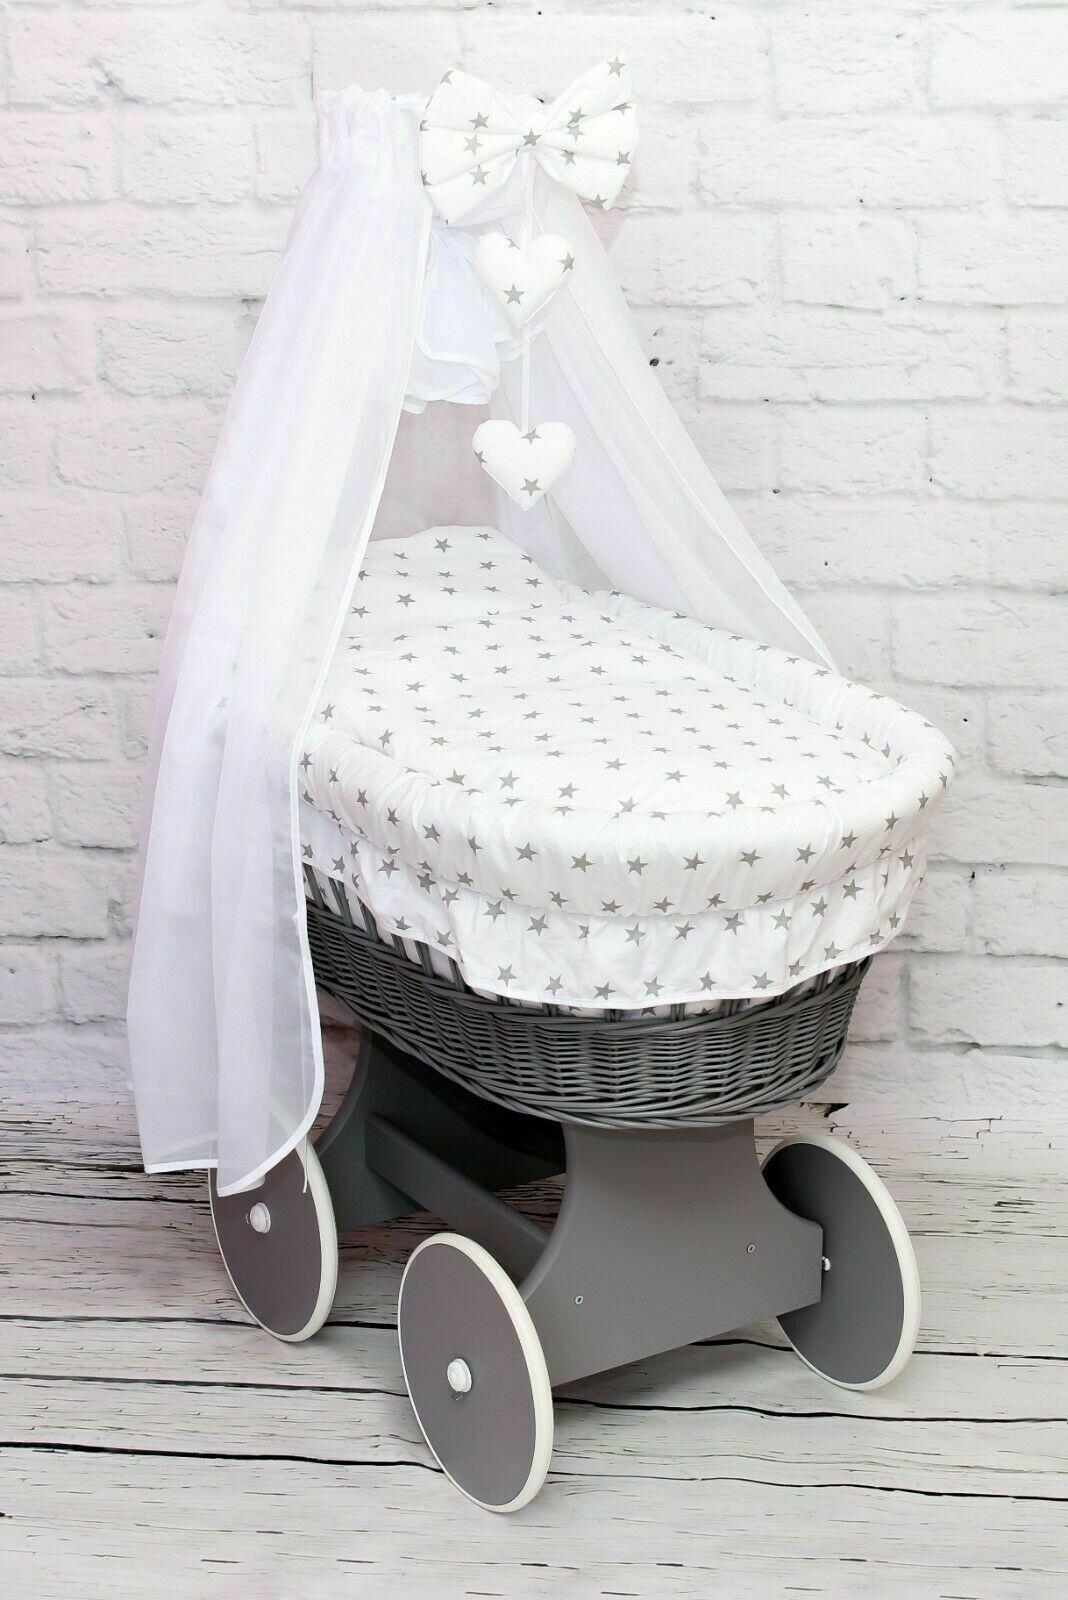 Full Bedding Set With Canopy To Fit Wicker Moses Basket Small Grey Stars With White